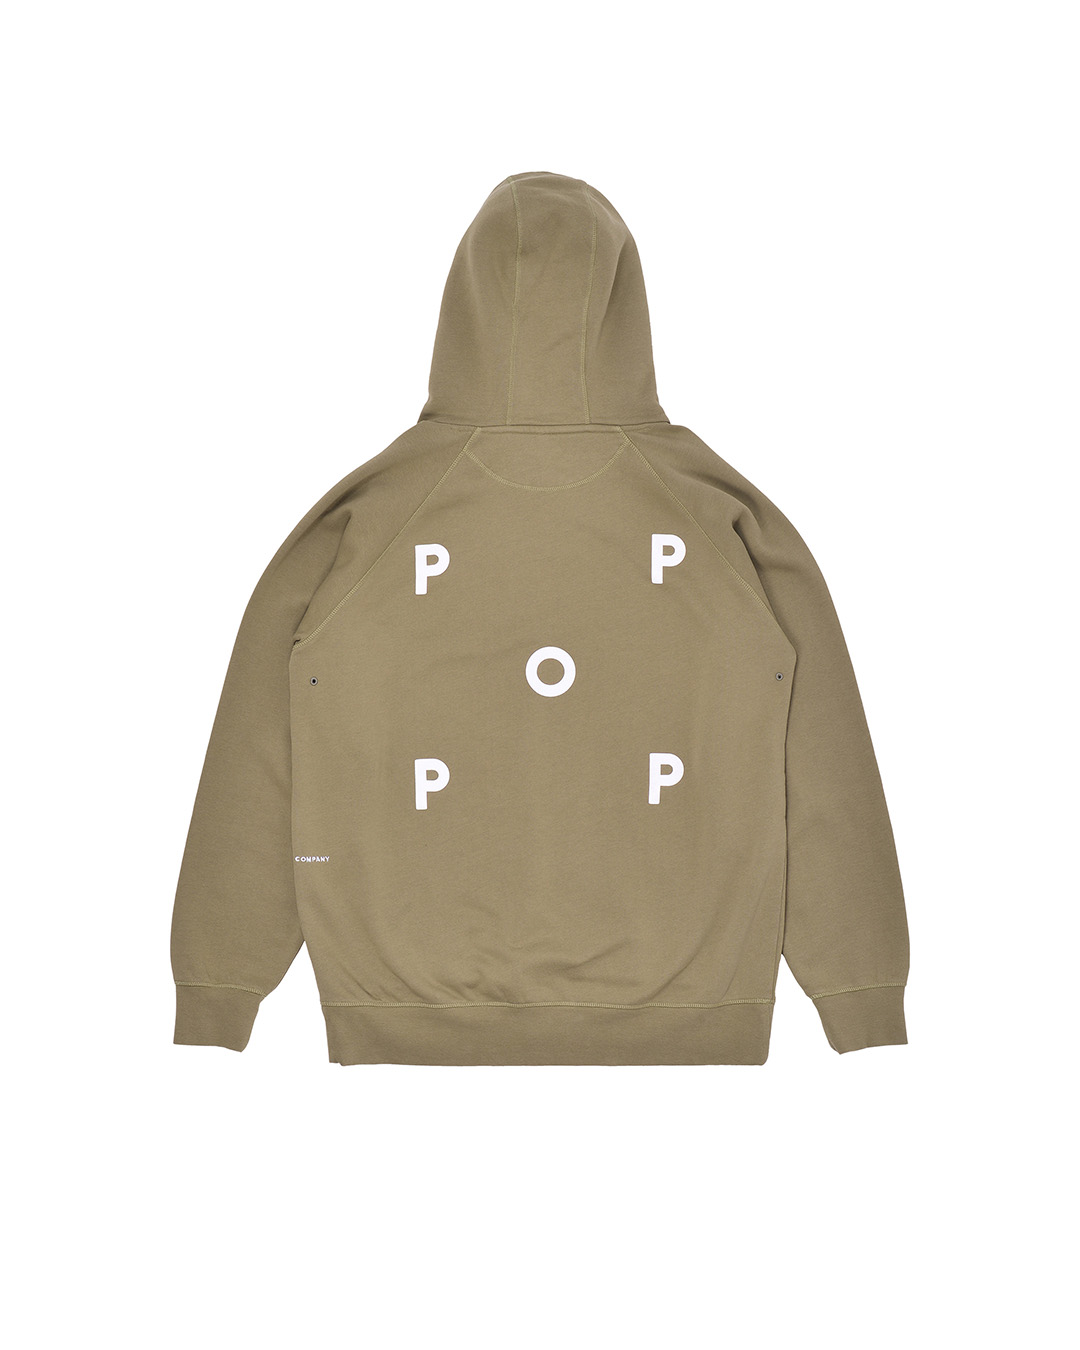 Pop Trading Company AW22 Collection - Pop Trading Company